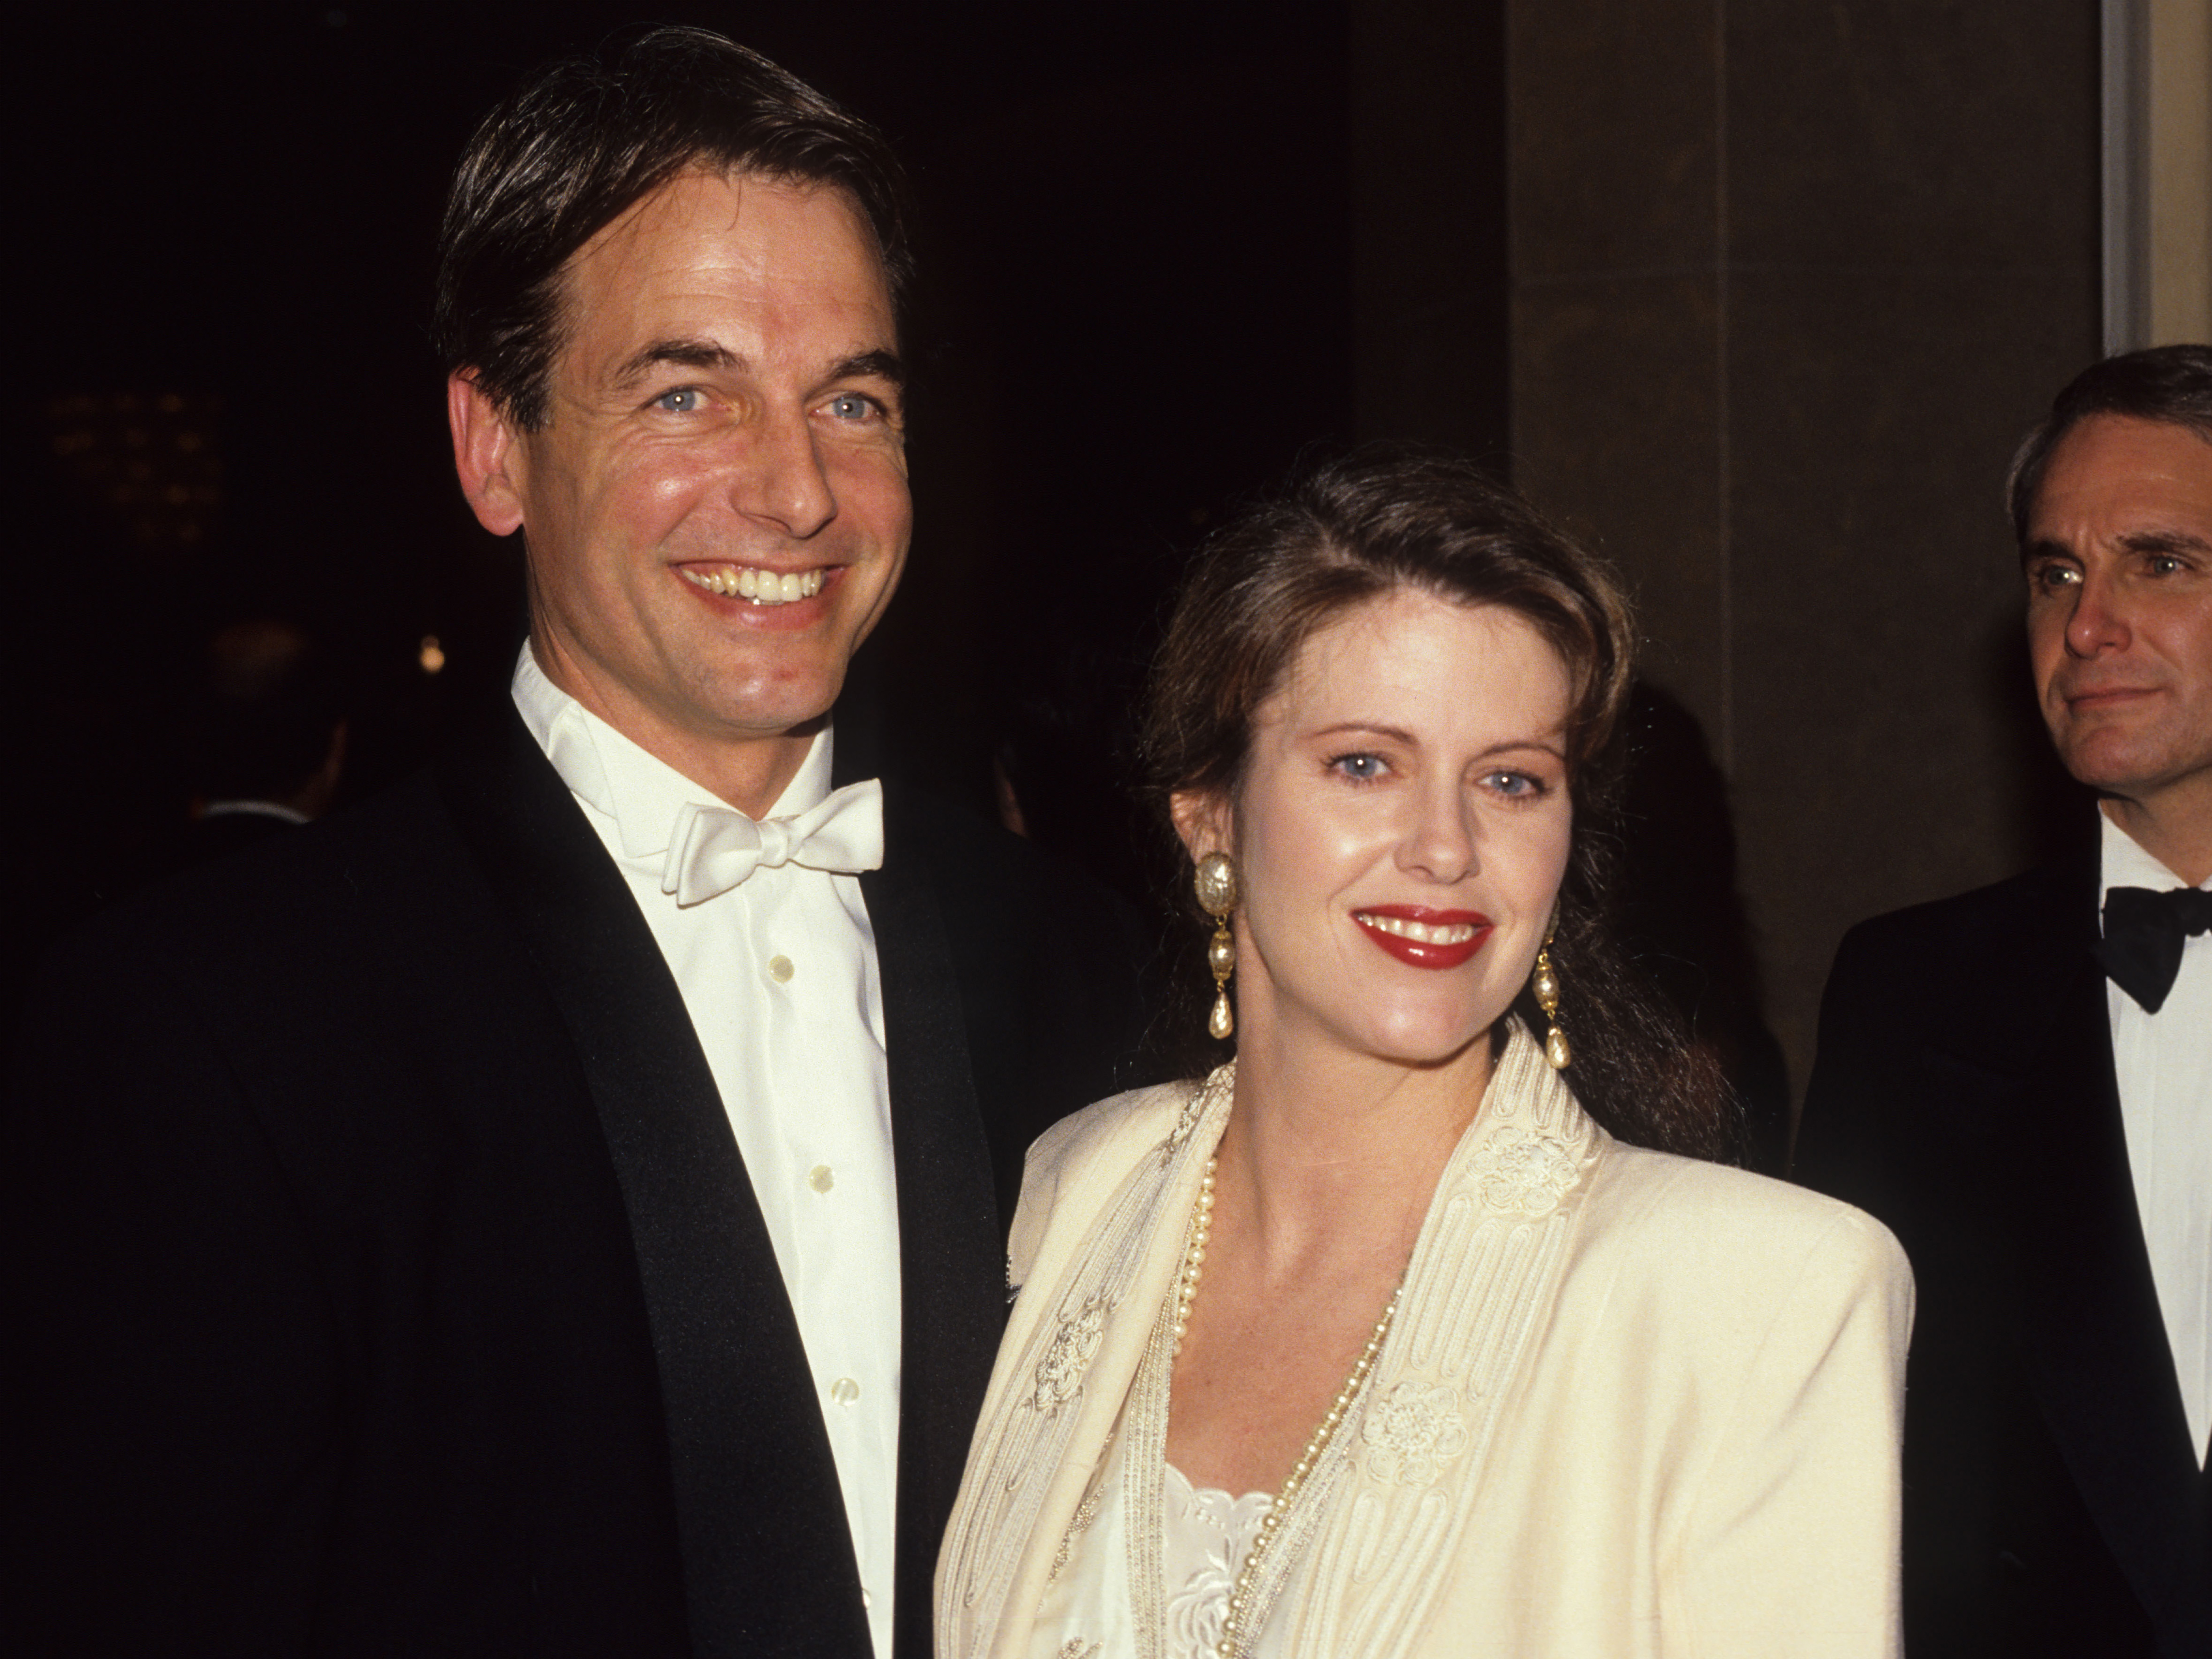 1992 Mark Harmon and Pam Dawber, 49th Golden Globes